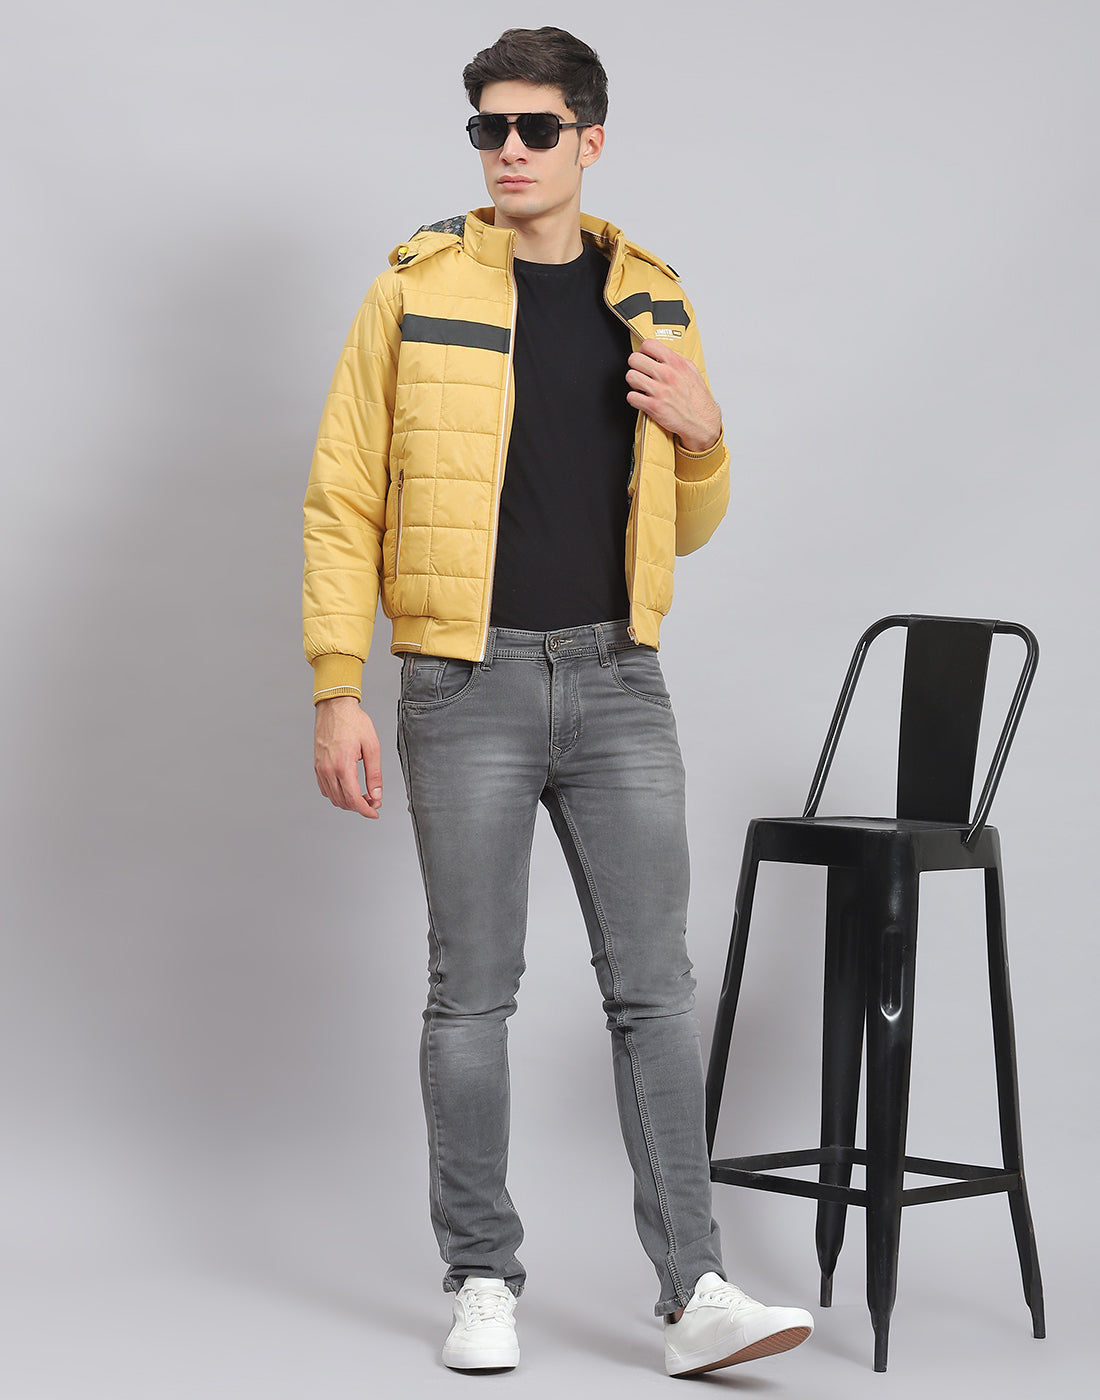 ROMWE Guys Solid Button Front Denim Jacket Without Tee | Denim outfit men, Yellow  denim, Denim jacket outfit